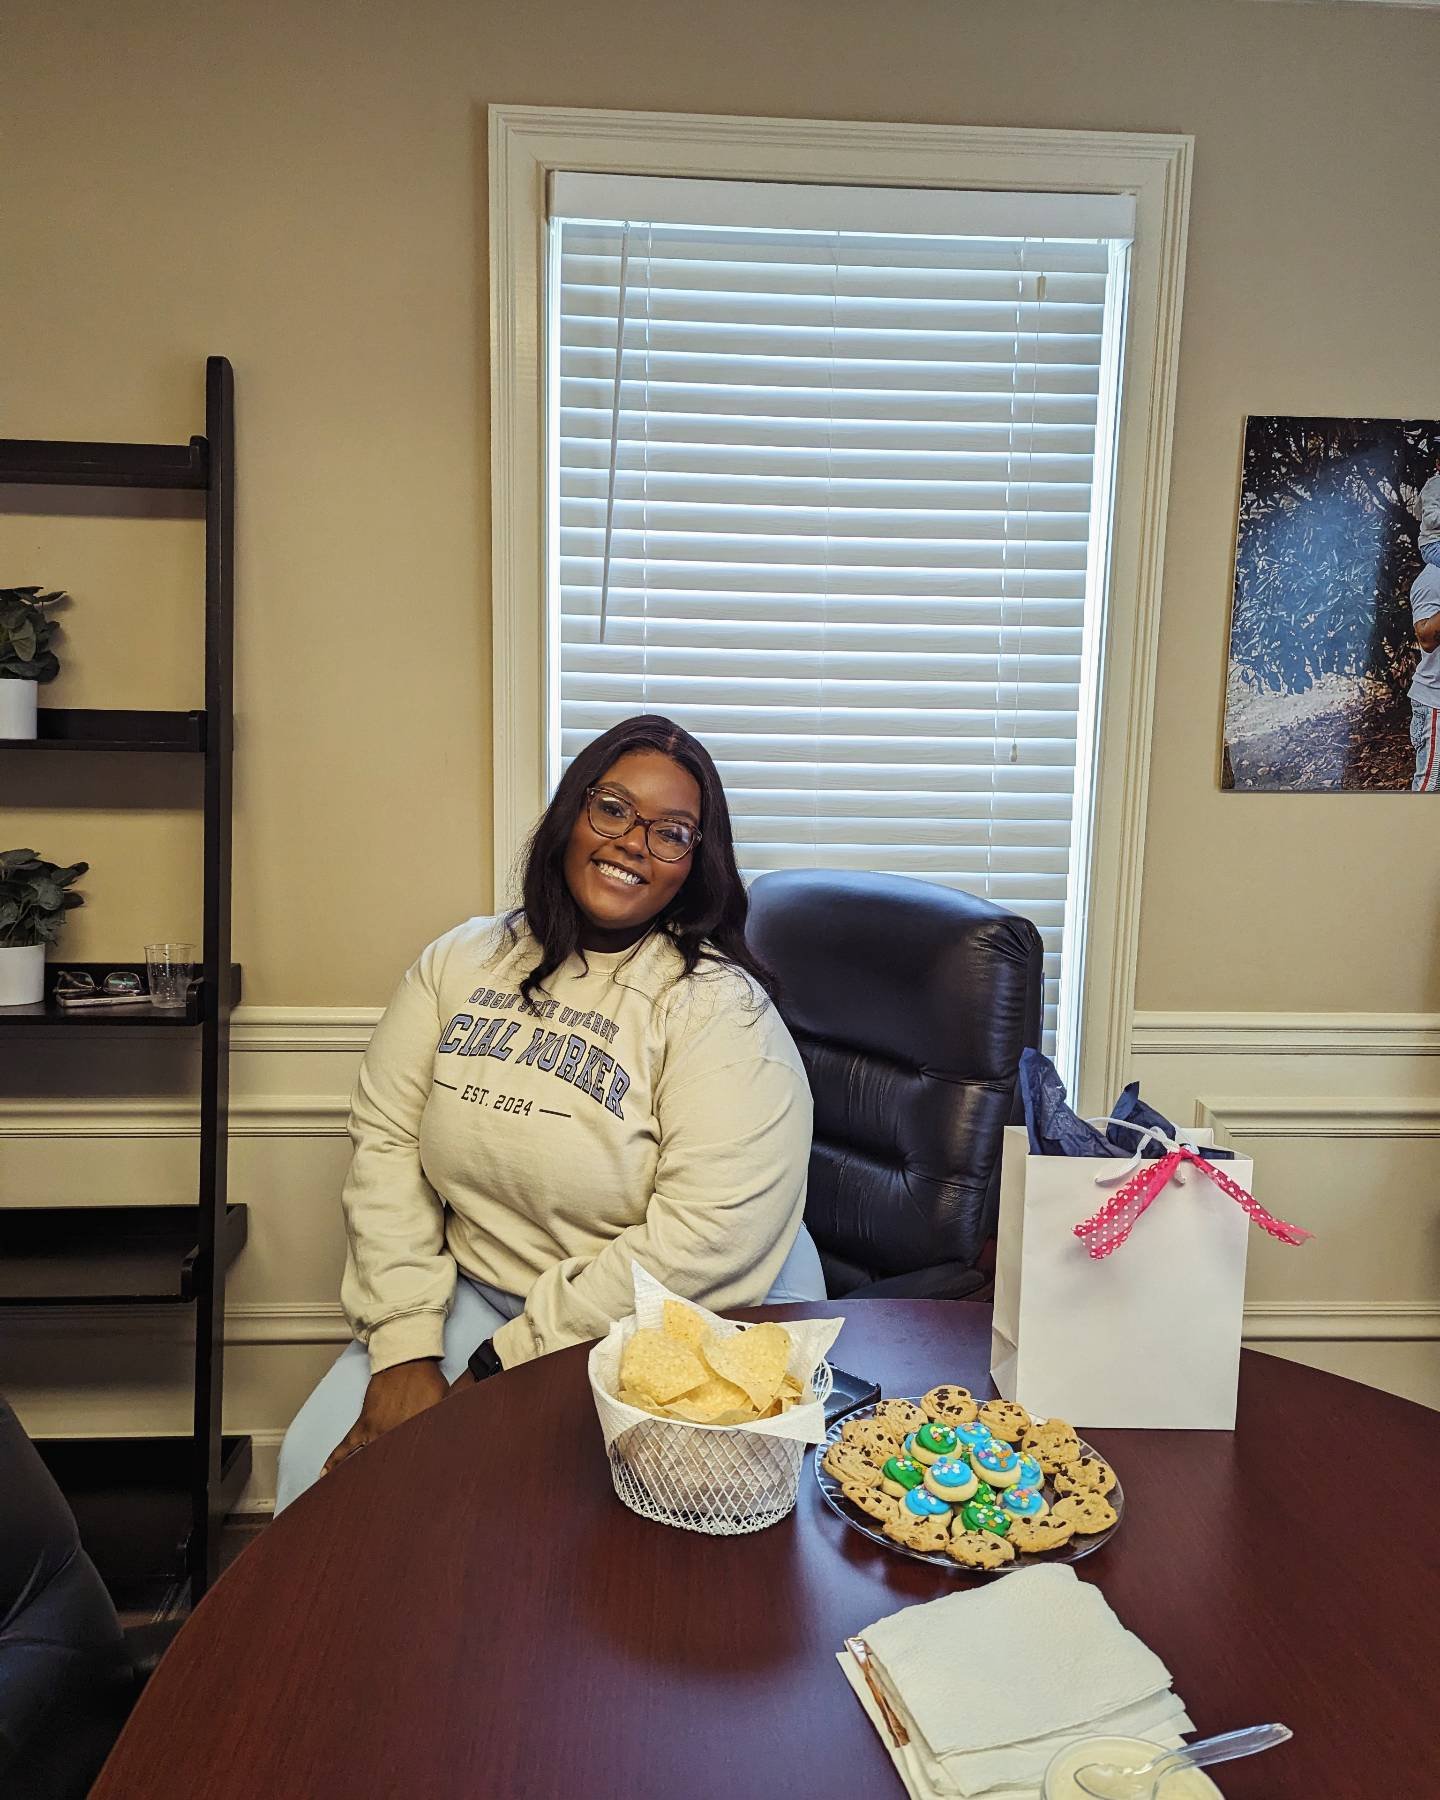 Friday was our intern's last day with us after 8 great months, and it was a bittersweet moment. We hate to see her leave, but we are excited about the amazing things she will do after graduating from GSU as a Social Worker! Everyone on our team is gr